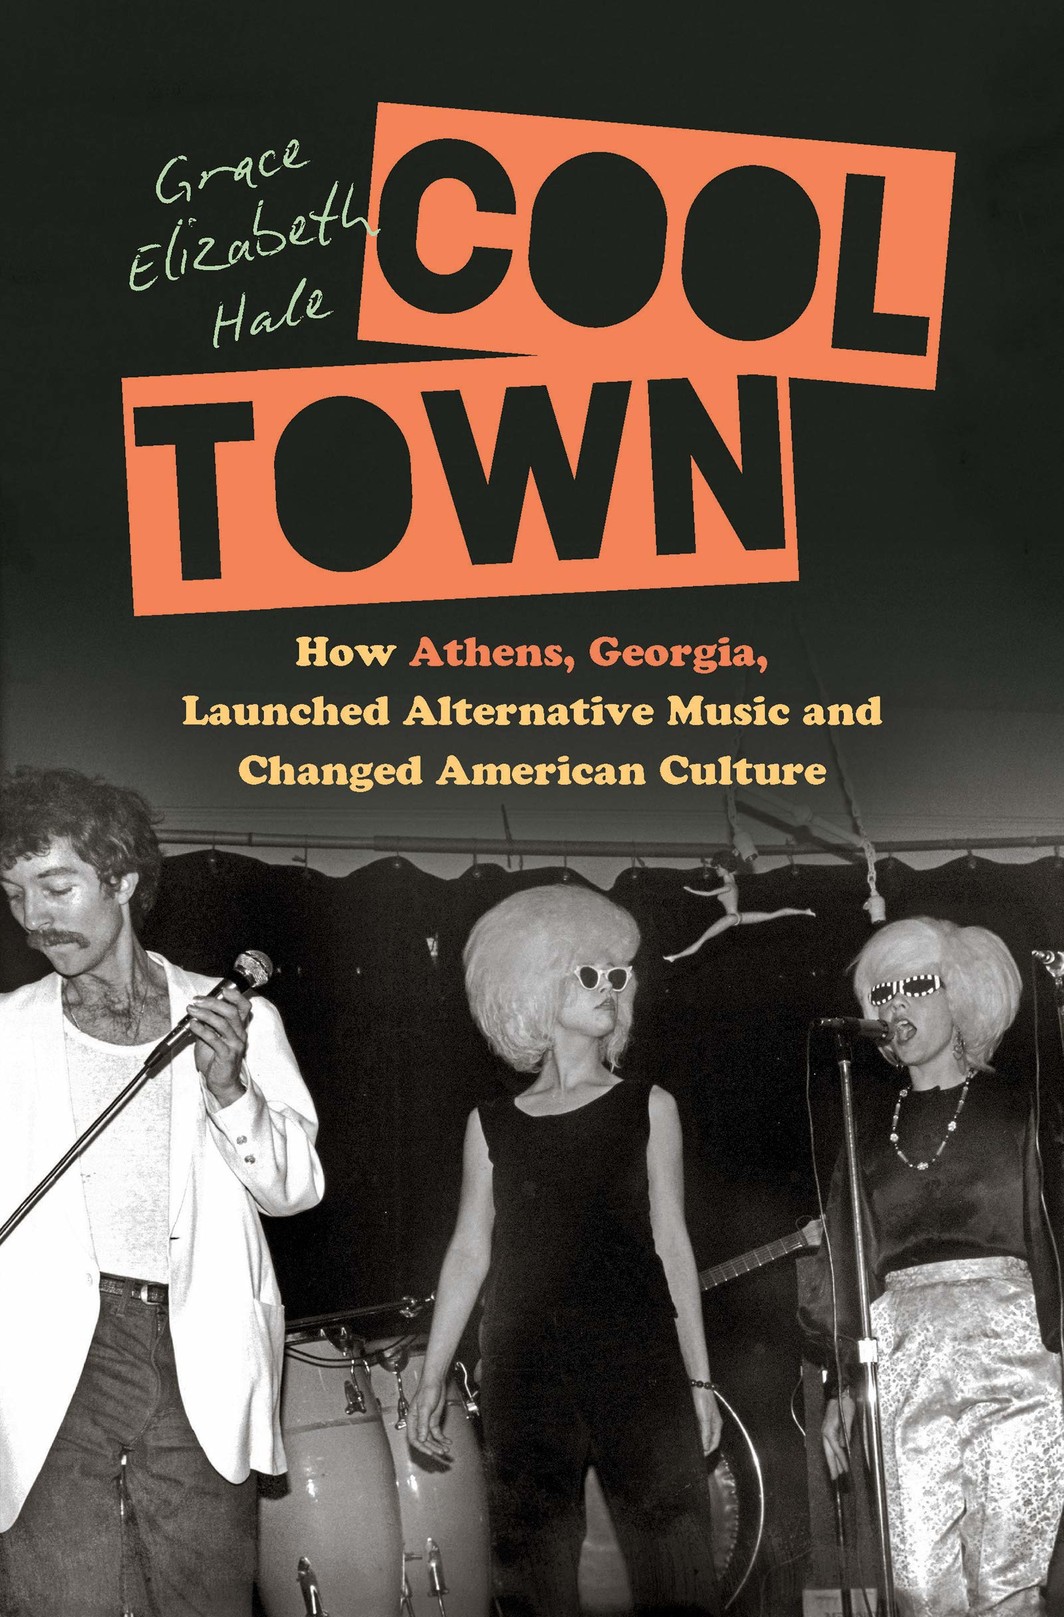 The cover of COOL TOWN: HOW ATHENS, GEORGIA, LAUNCHED ALTERNATIVE MUSIC AND CHANGED AMERICAN CULTURE